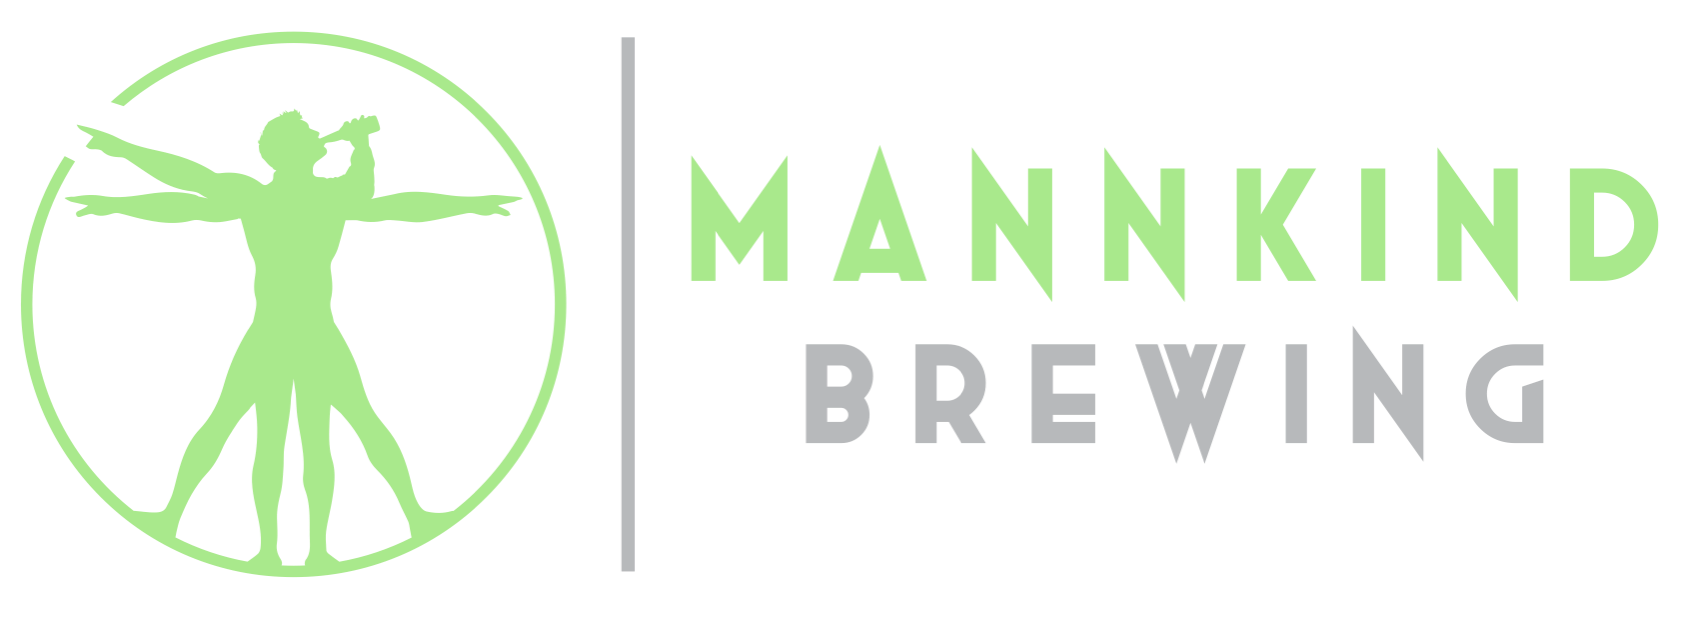 Mannkind Brewing Company